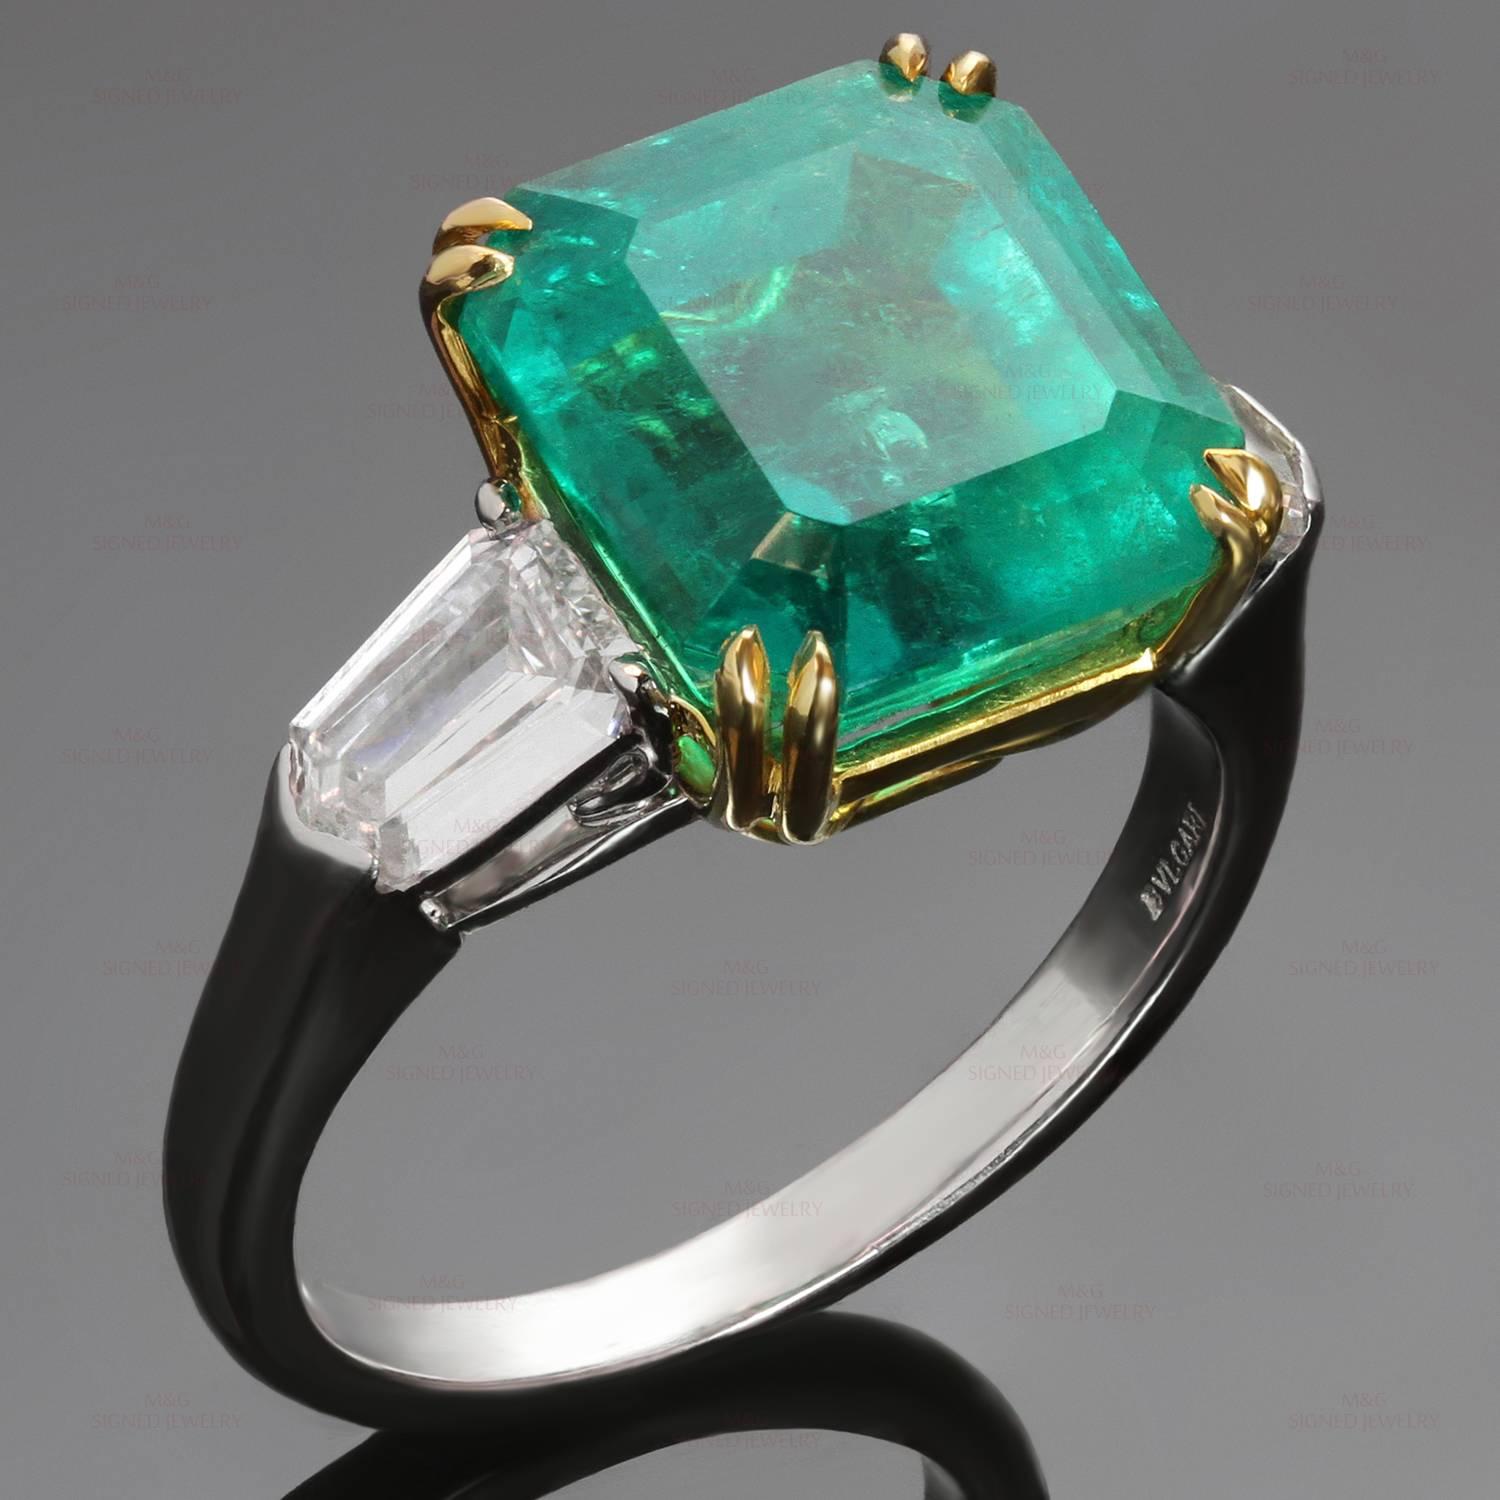 This gorgeous Bulgari ring is crafted in platinum and features an octagonal step-cut Colombian emerald weighing 6.13 carat, set in 18k yellow prongs flanked by 2 shield-cut diamonds measuring 6.00 x 4.20 x 2.15 mm and weighing an estimated 0.90